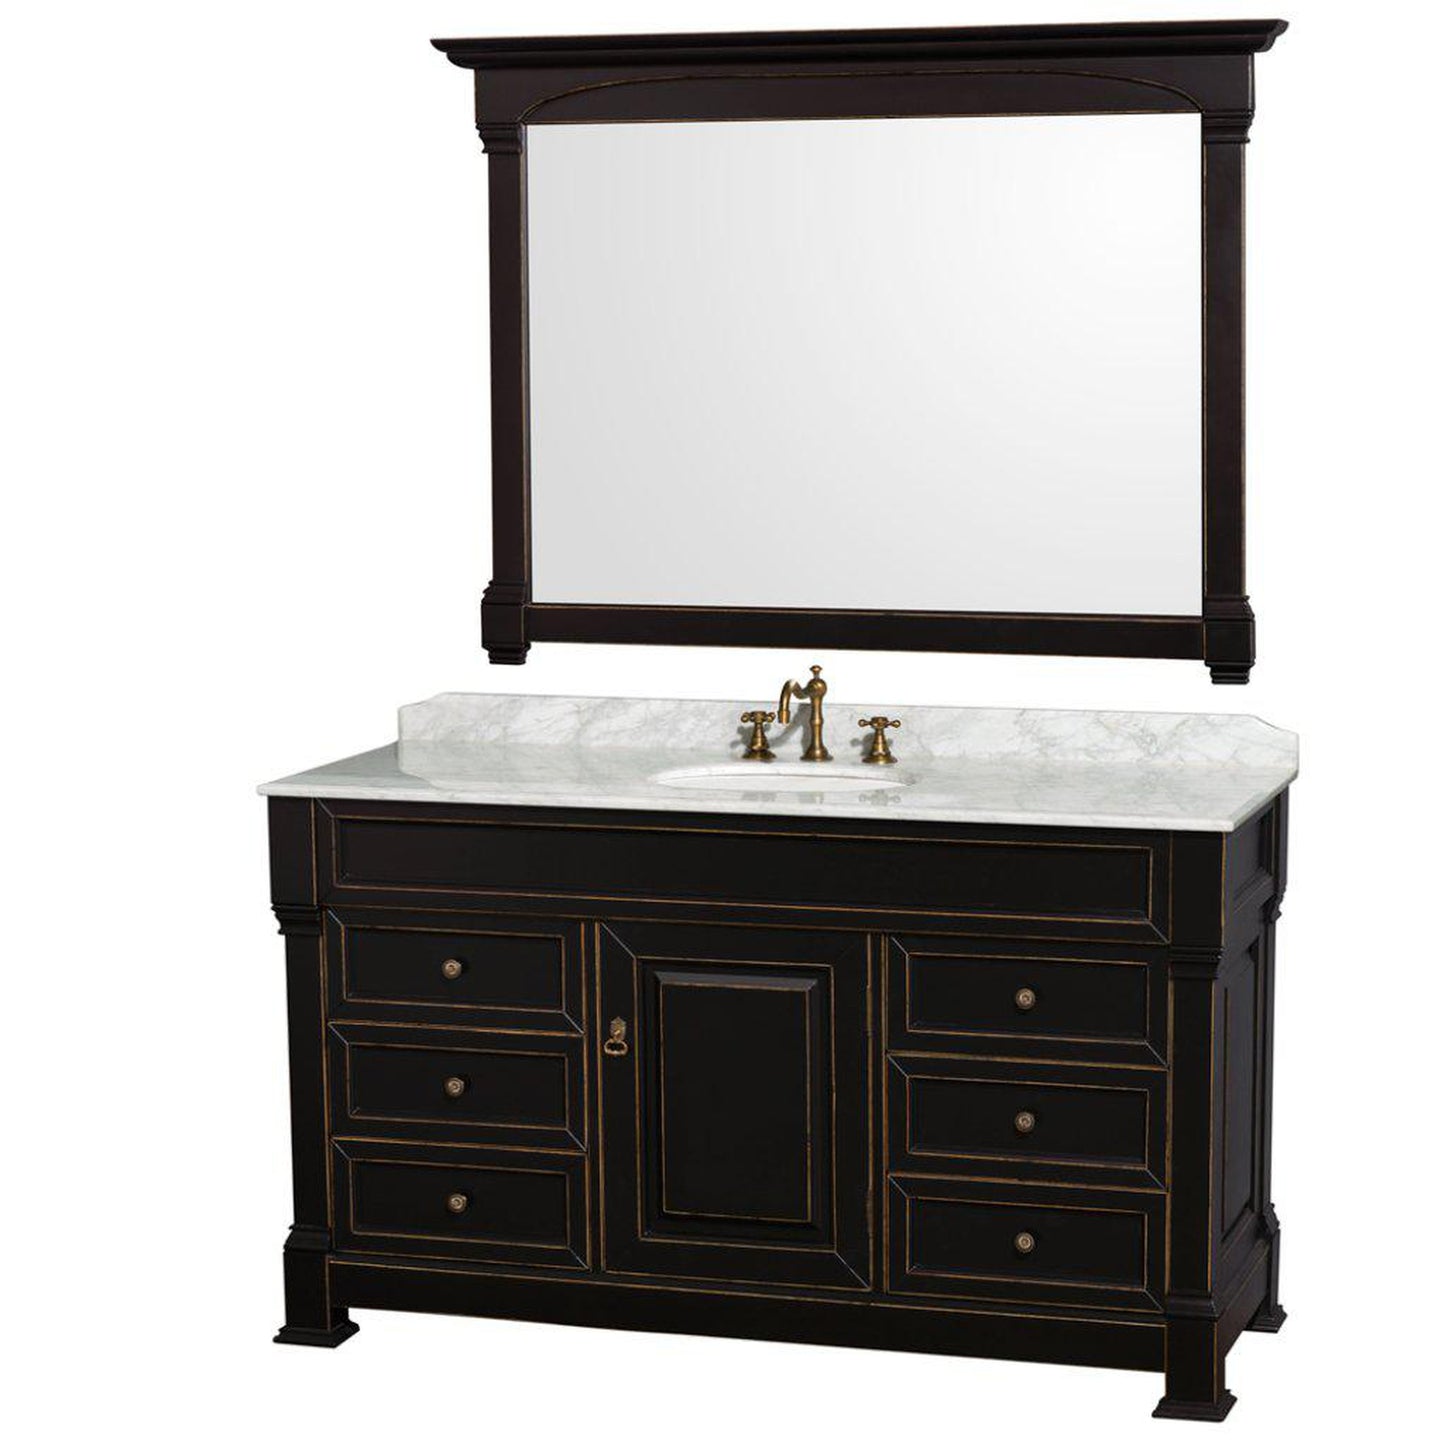 Wyndham Collection Andover 60" Single Bathroom Black Vanity With White Carrara Marble Countertop And Undermount Oval Sink, And 56" Mirror